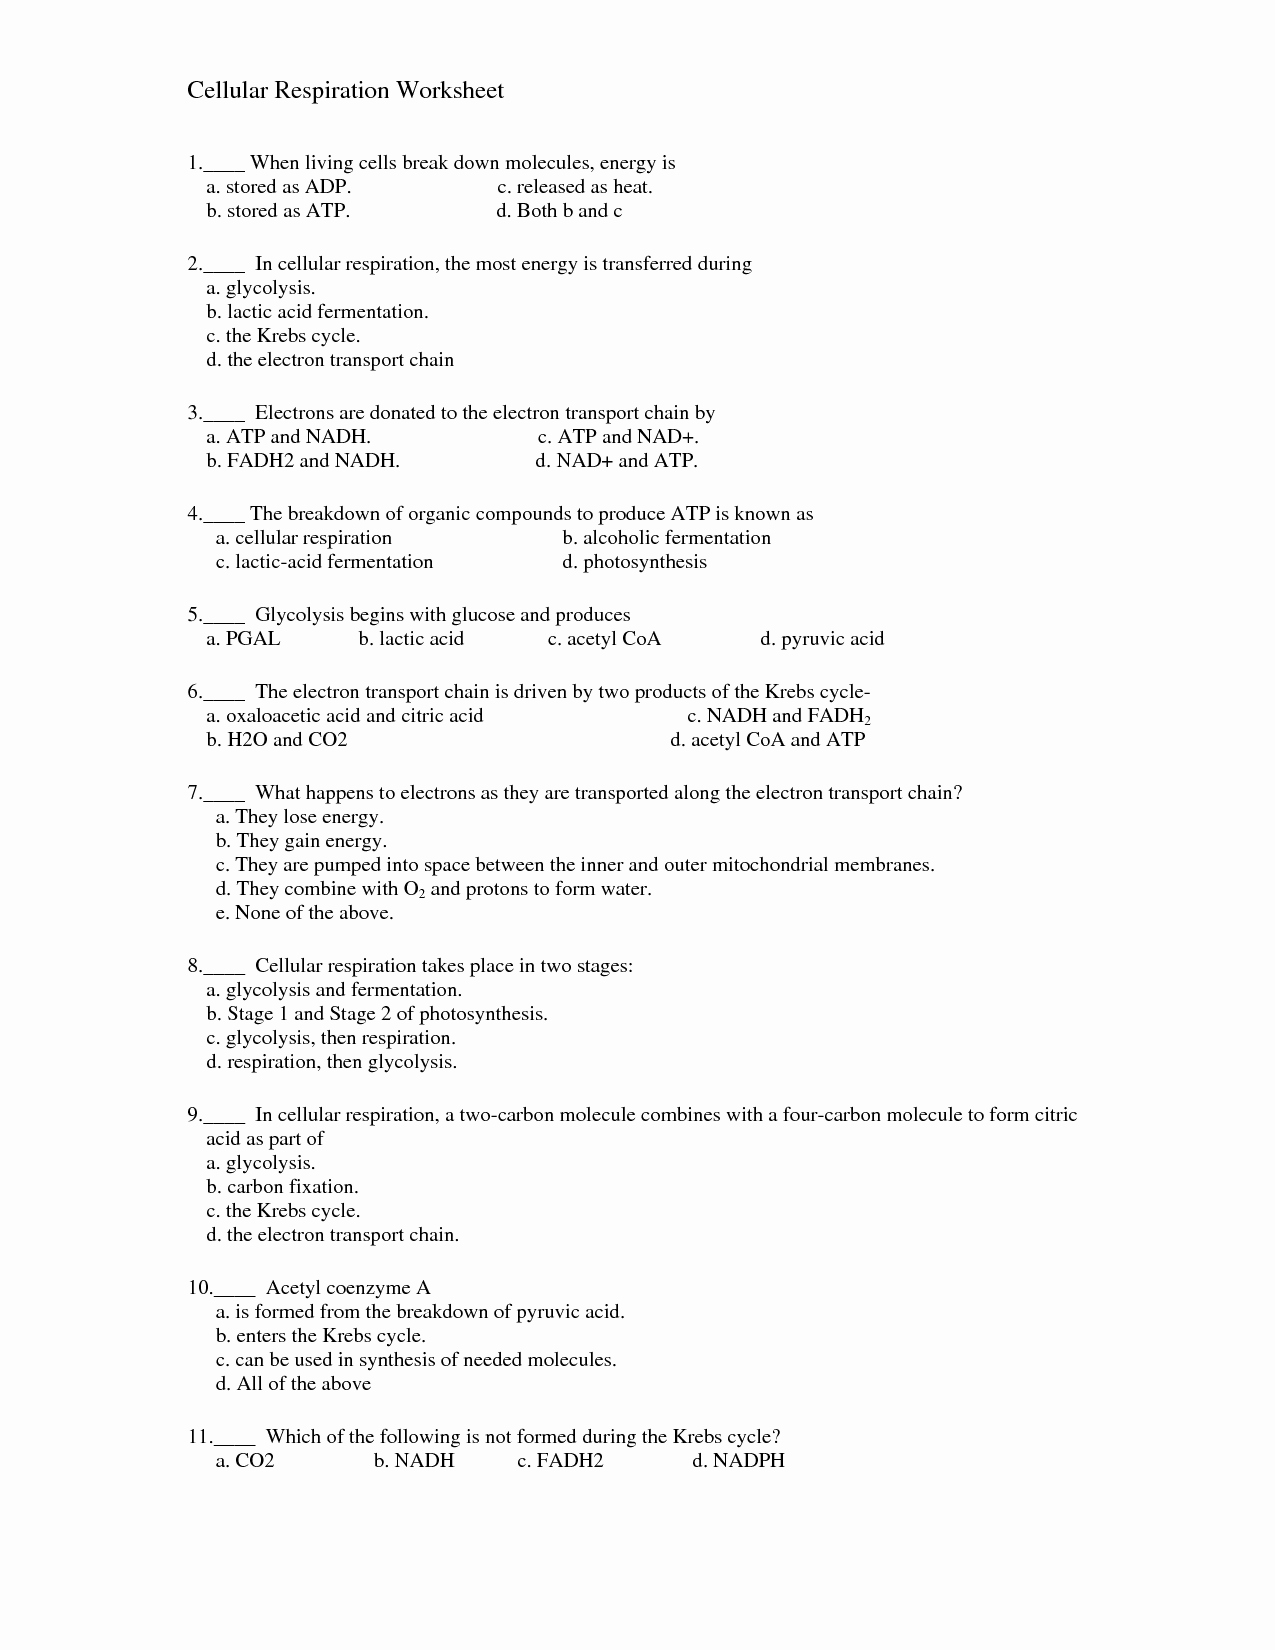 Cellular Respiration Review Worksheet Best Of 15 Best Of Glycolysis Worksheet Answers Chapter 9